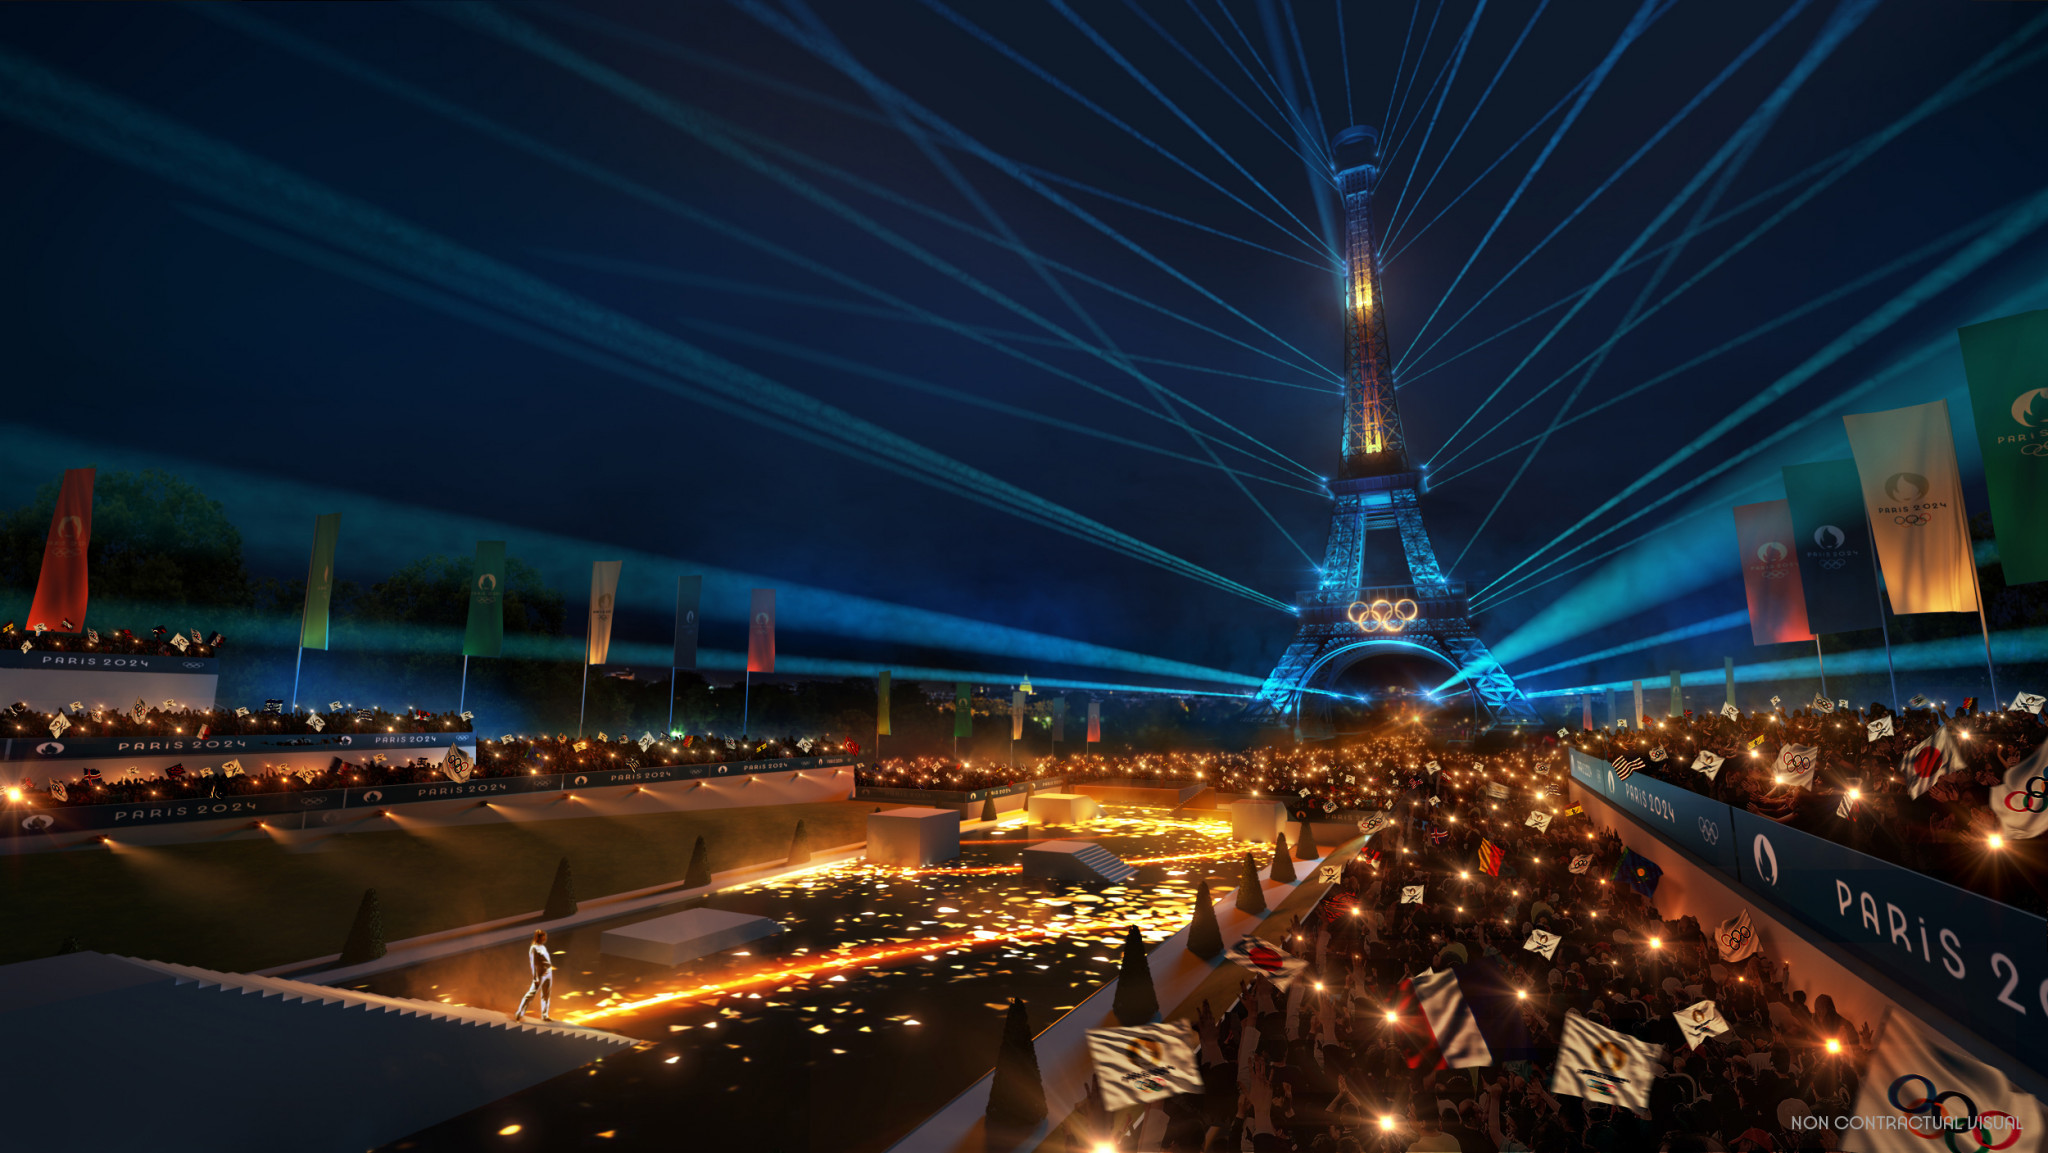 The Eiffel Tower is set to play a key role in the Opening Ceremony ©Paris 2024